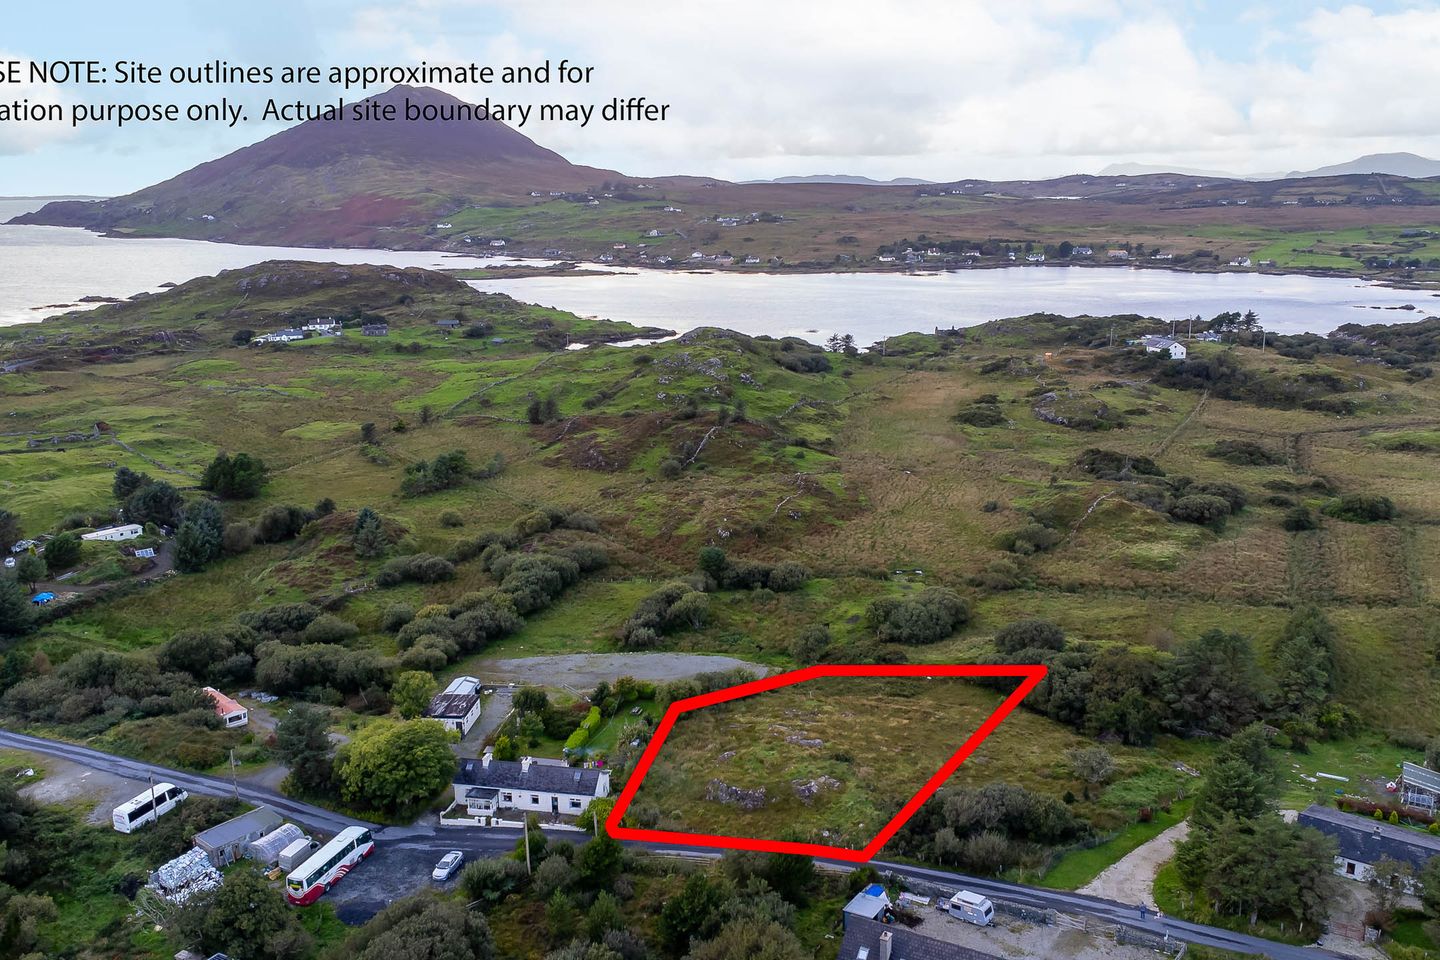 Site Circa 0.53 Acre At Creggans, Letterfrack, Co. Galway